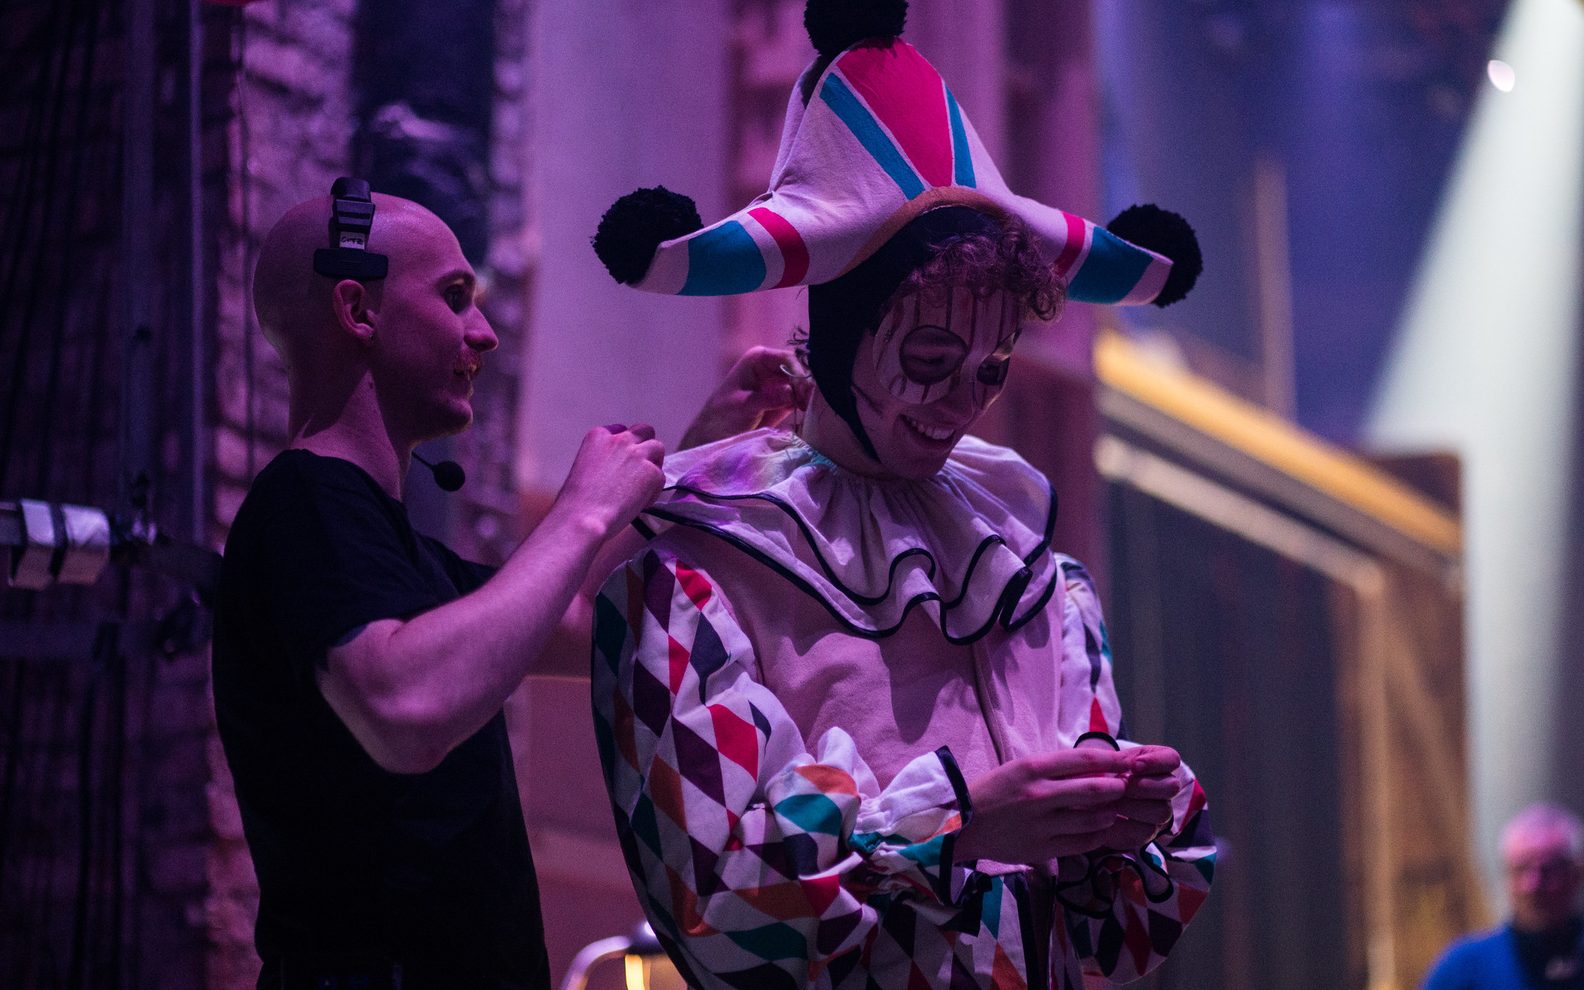 An actor stands backstage smiling in an Italian-style harlequin costume. A member of production staff is adjusting his microphone behind him.